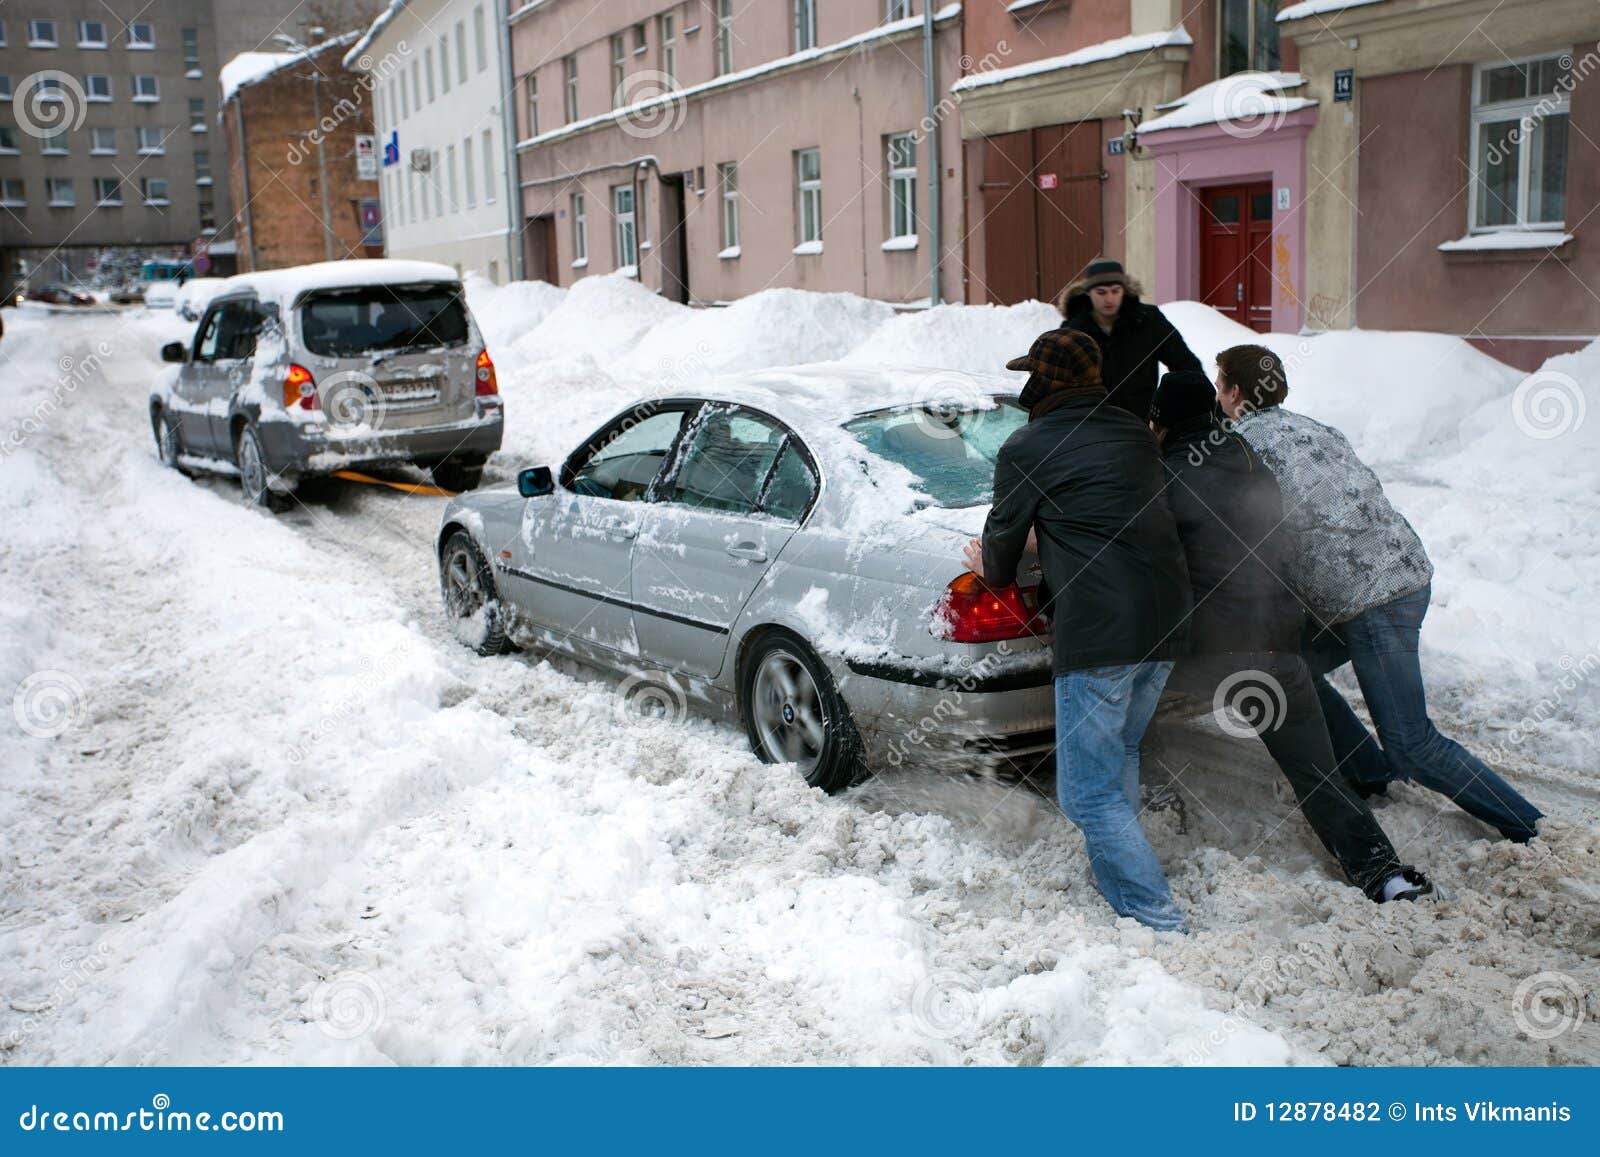 clipart car stuck in snow - photo #40